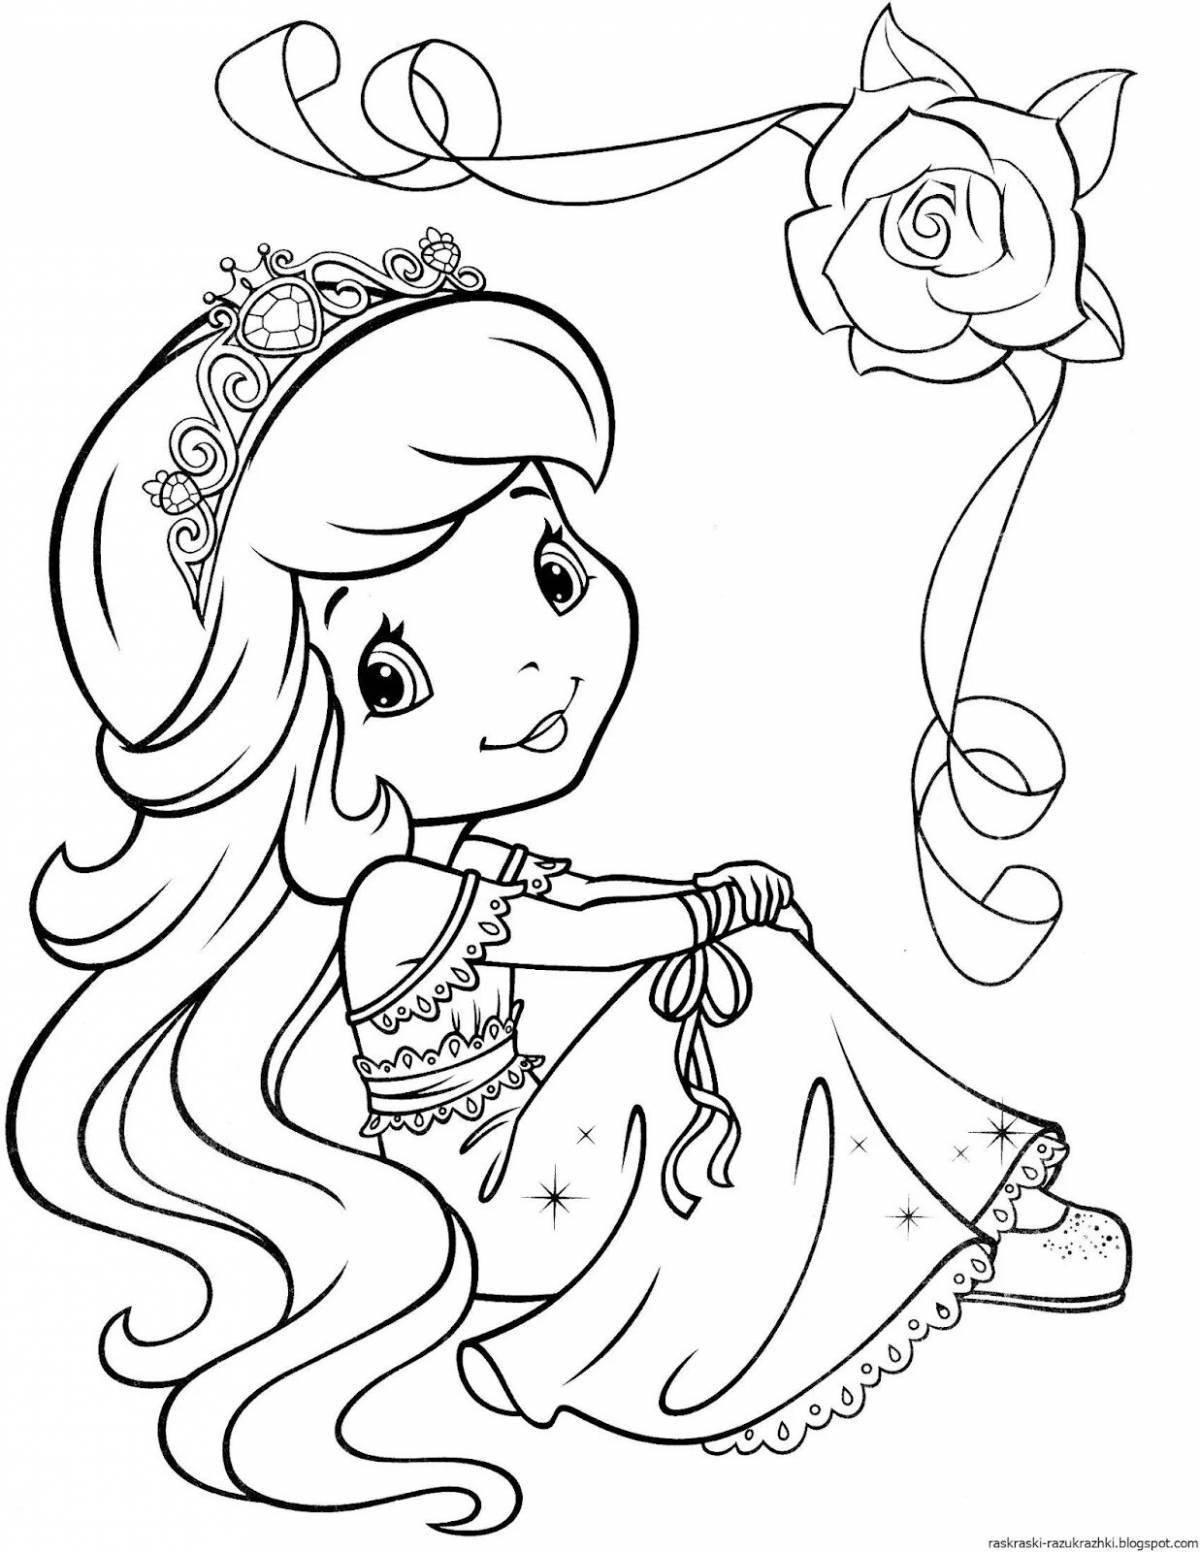 Princess Exalted coloring pages